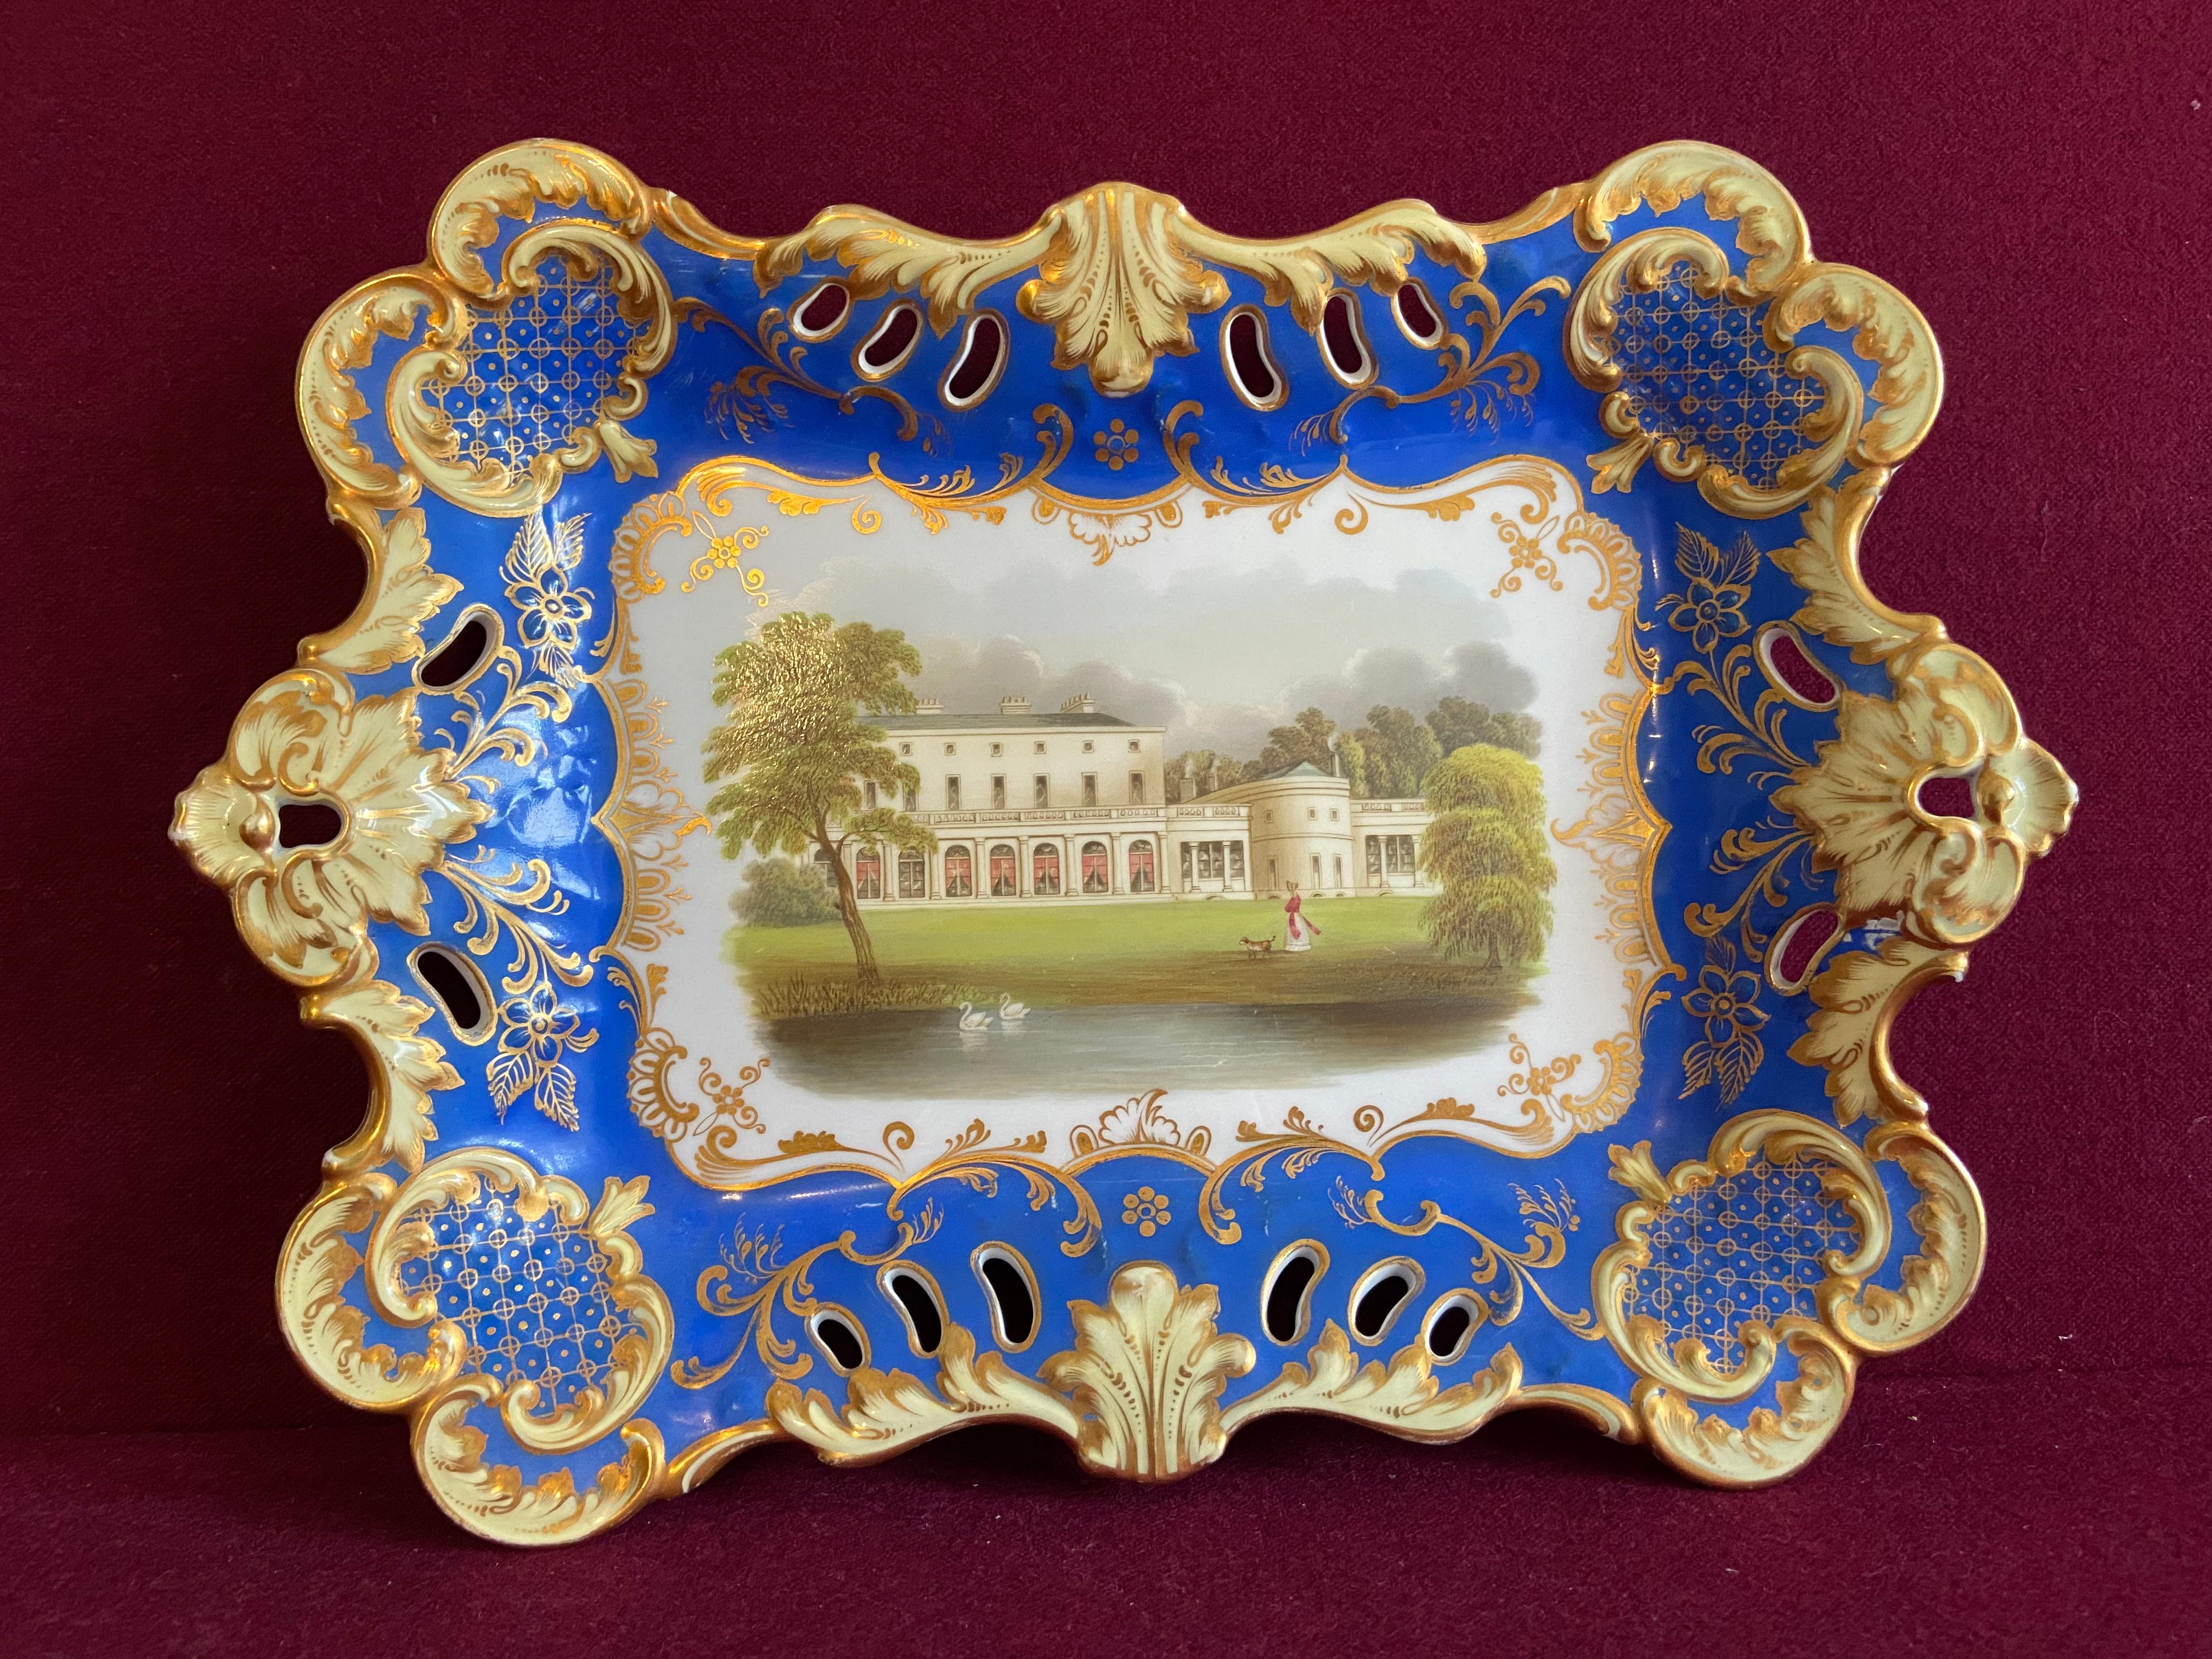 An English Porcelain Tray c.1830 very finely painted with a view of Frogmore House, Windsor.

Frogmore House is a 17th-century English country house owned by the Crown Estate. It is a historic Grade I listed building. The house is located on the